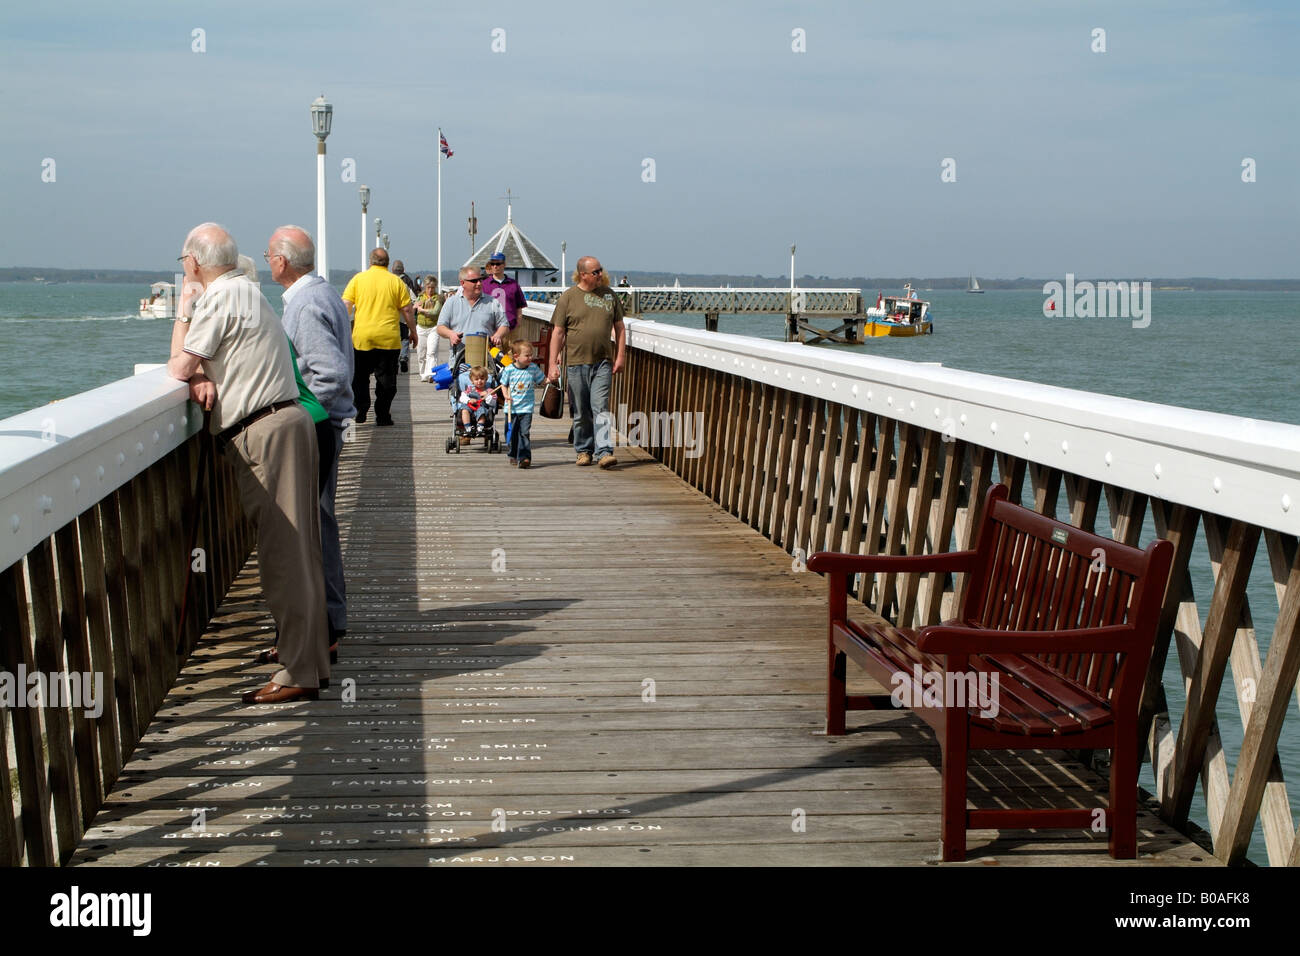 Yarmouth Pier Isle of Wight England UK Built 1876 as a deepwater terminal Stock Photo